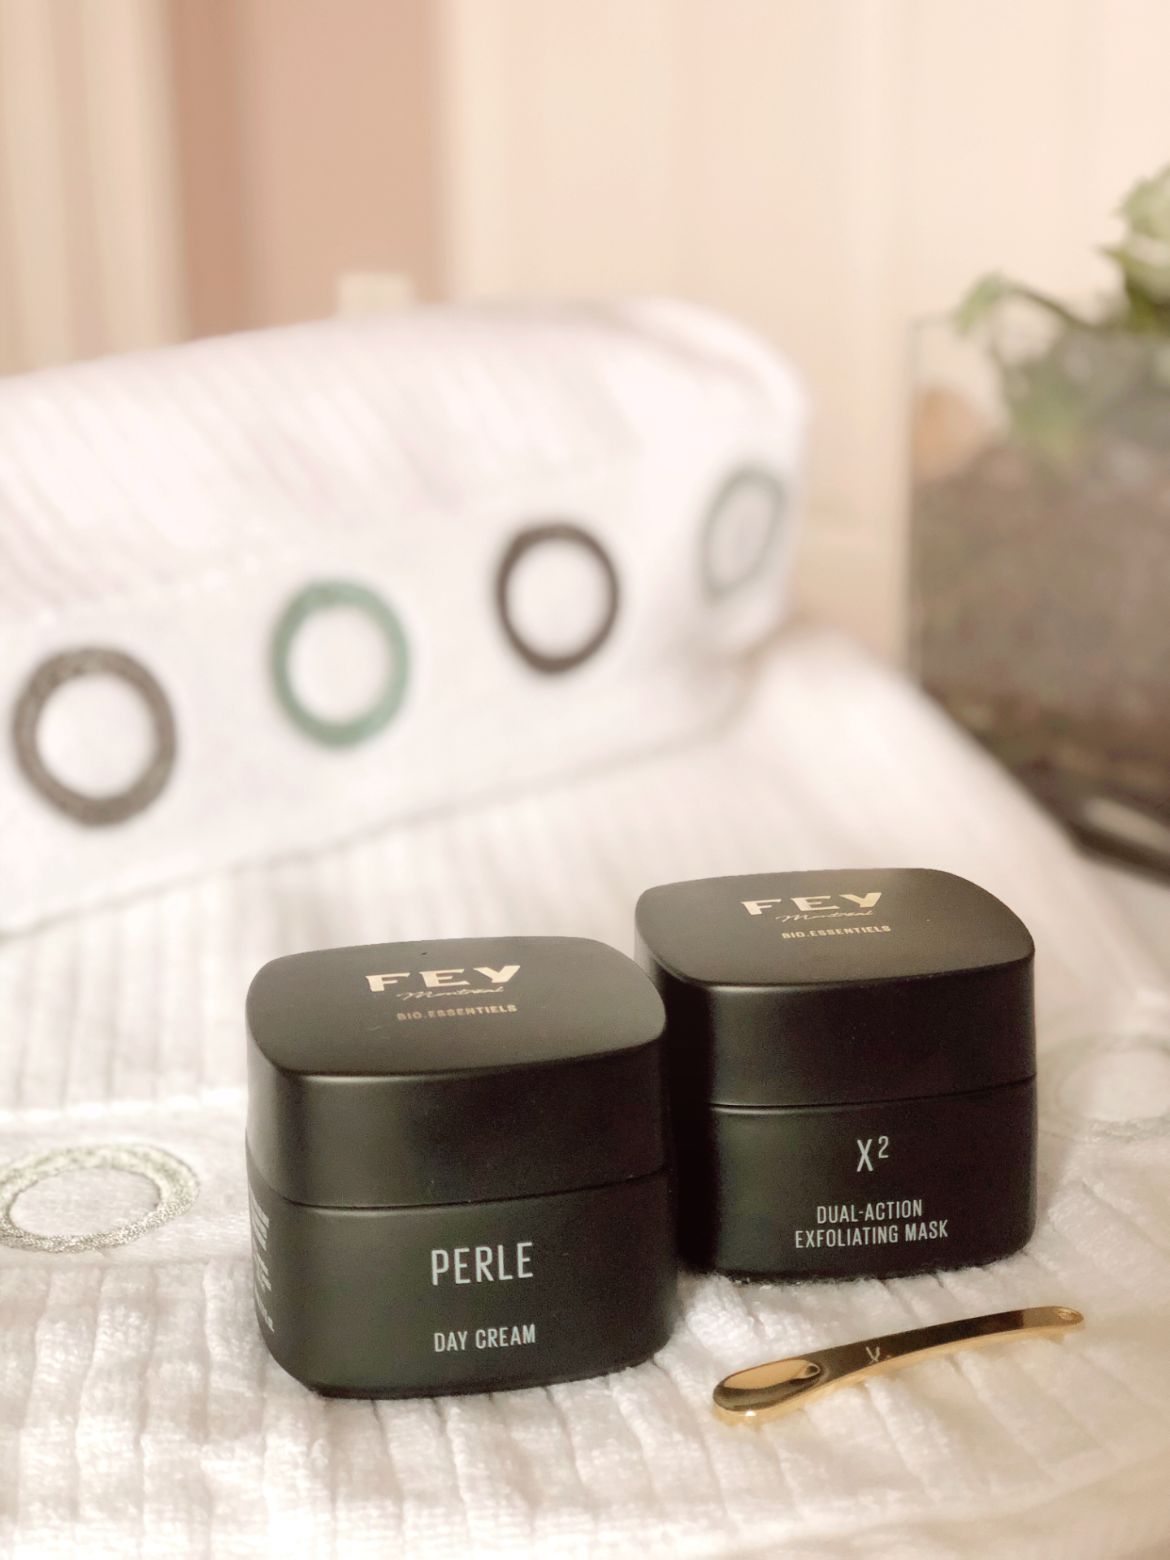 X² Exfoliating Mask & PERLE Day Cream Review by Suburban Tourist